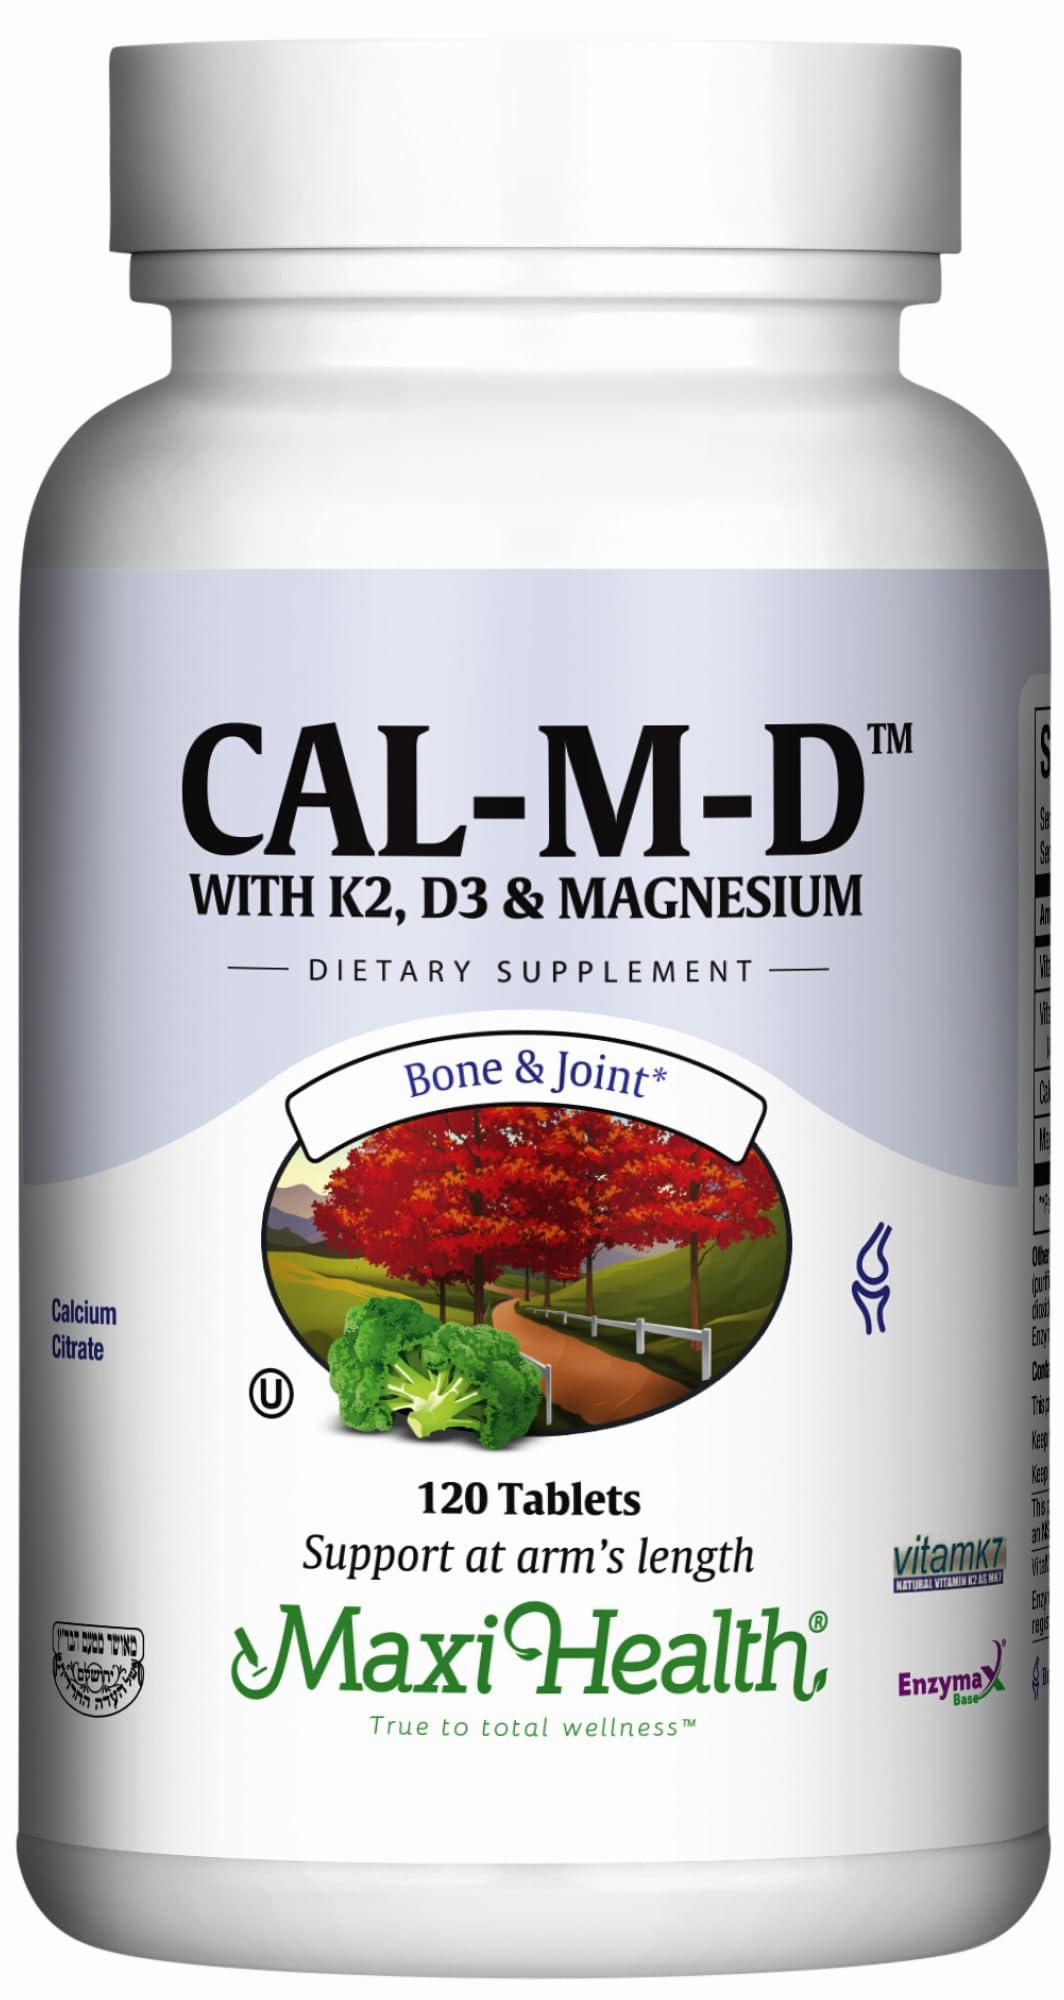 A bottle of Cal-M-D, a dietary supplement for bone and joint health.